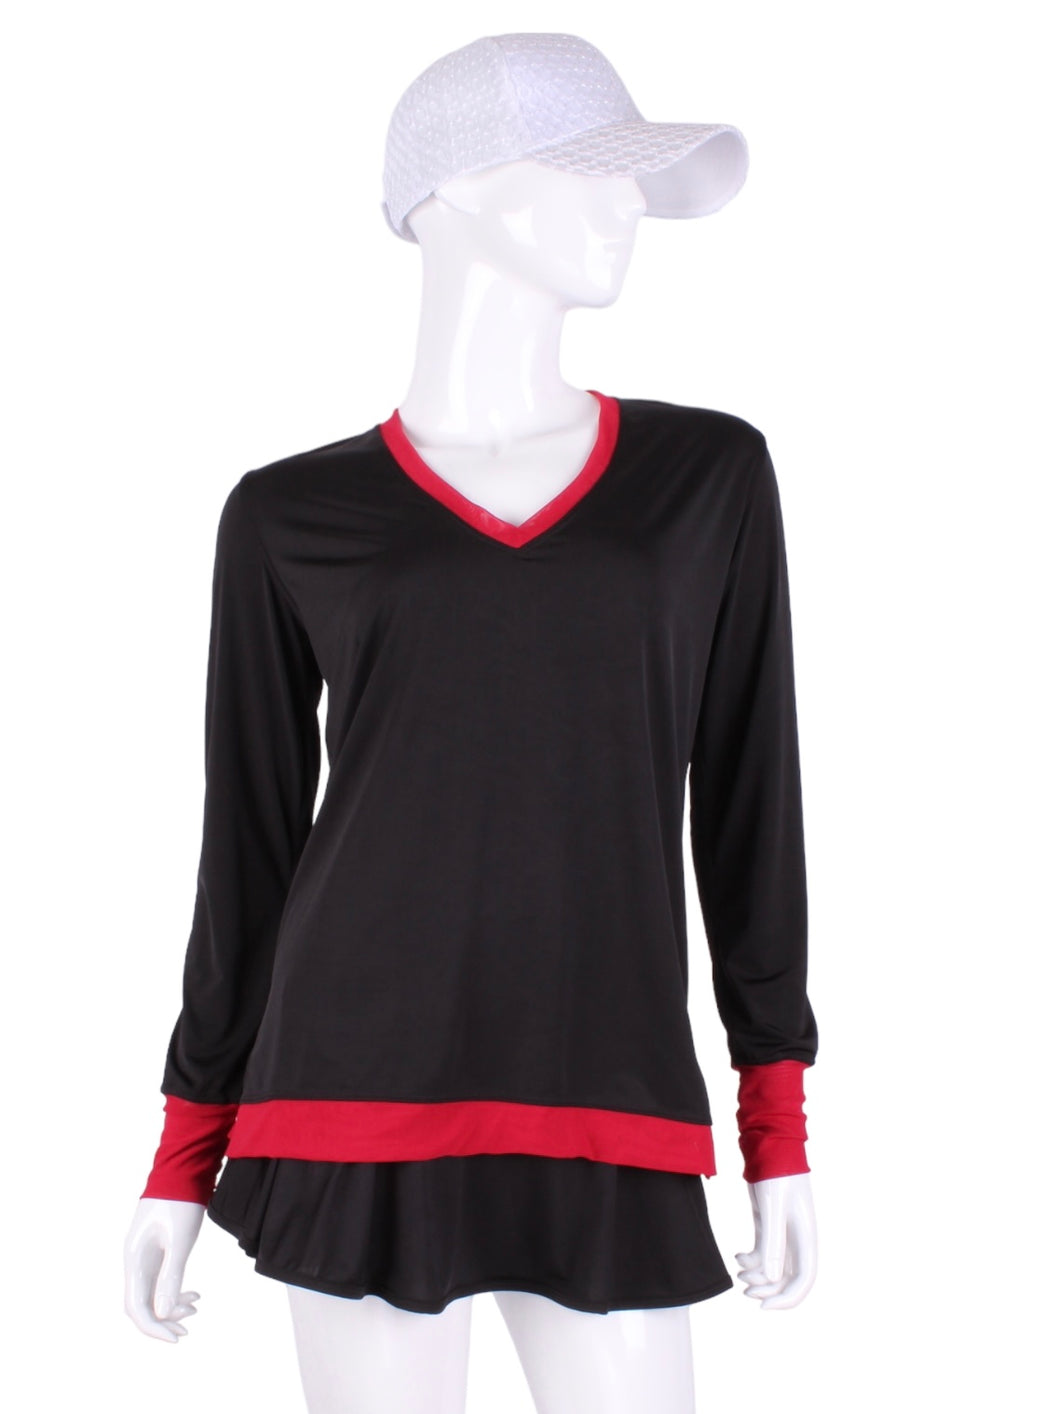  Black Long Sleeve Very Vee Tee + Red Mesh. The collar and cuffs are accented with feminine mesh and the body is flowy and soft.  It’s called the Long Sleeve Very Vee Tee - because as you can see - the Vee is - well you know - VERY VEE!  For the tennis lady who loves to leave her chest open - but cover her arms (and other bits) this top is seductive in a sweet way!